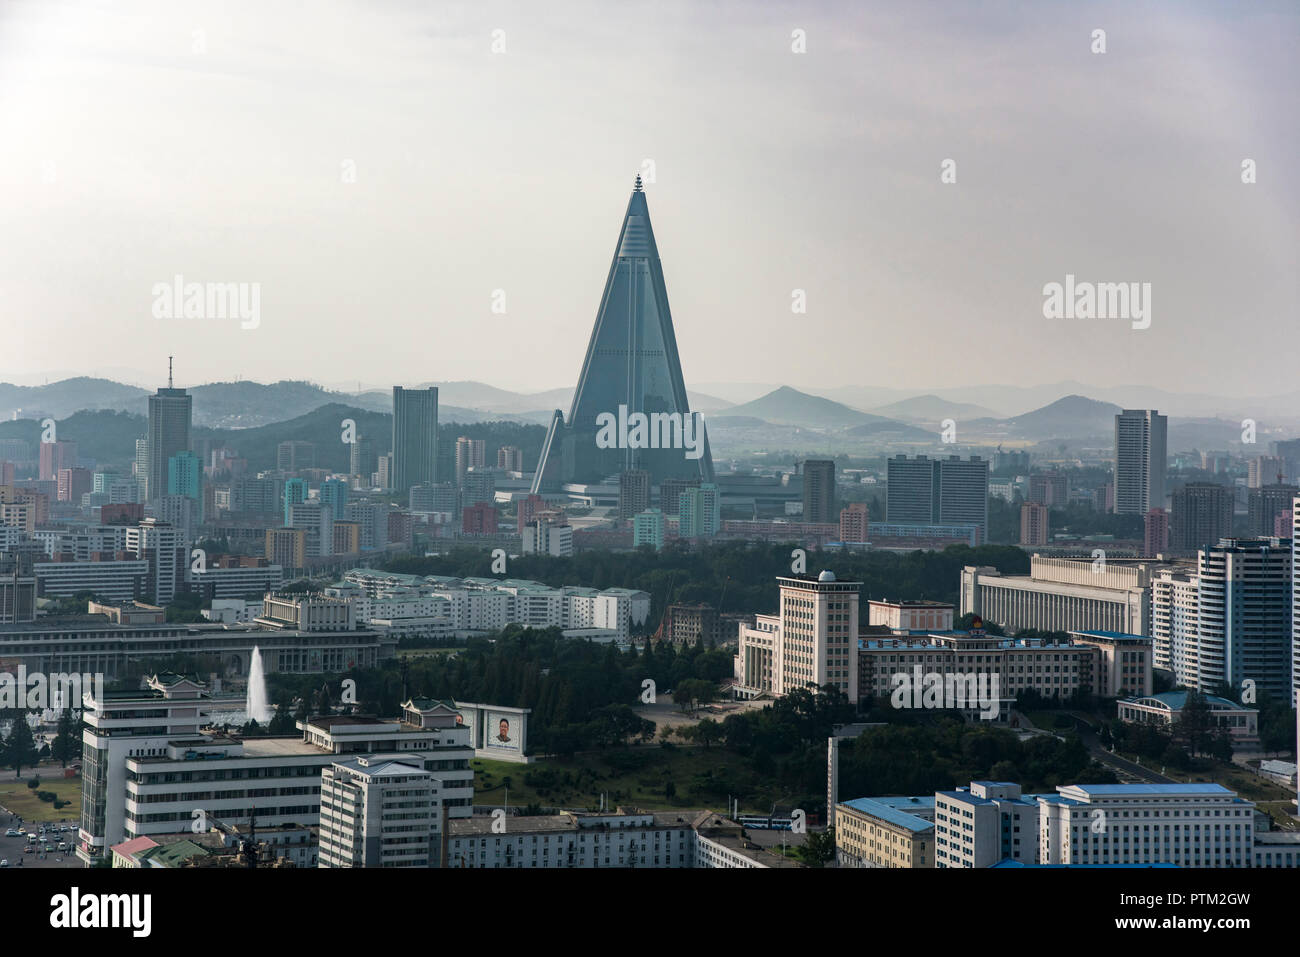 Views of the Ryugyong Hotel and Pyongyang City taken from the Juche Tower in North Korea. Stock Photo